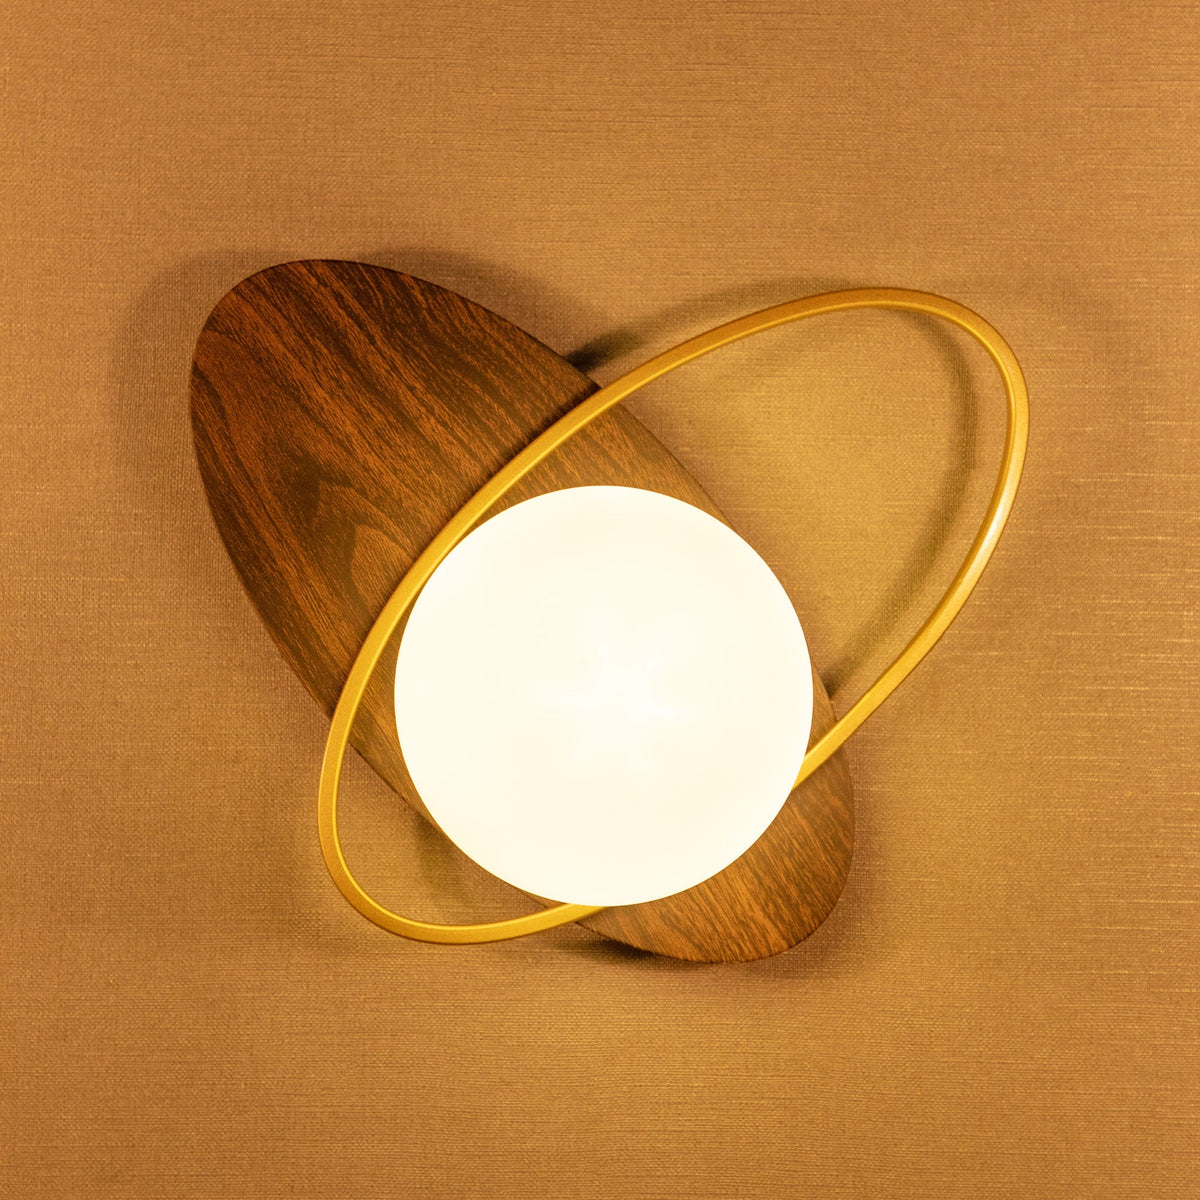 bUY Woody LED Wall Light ONLINE